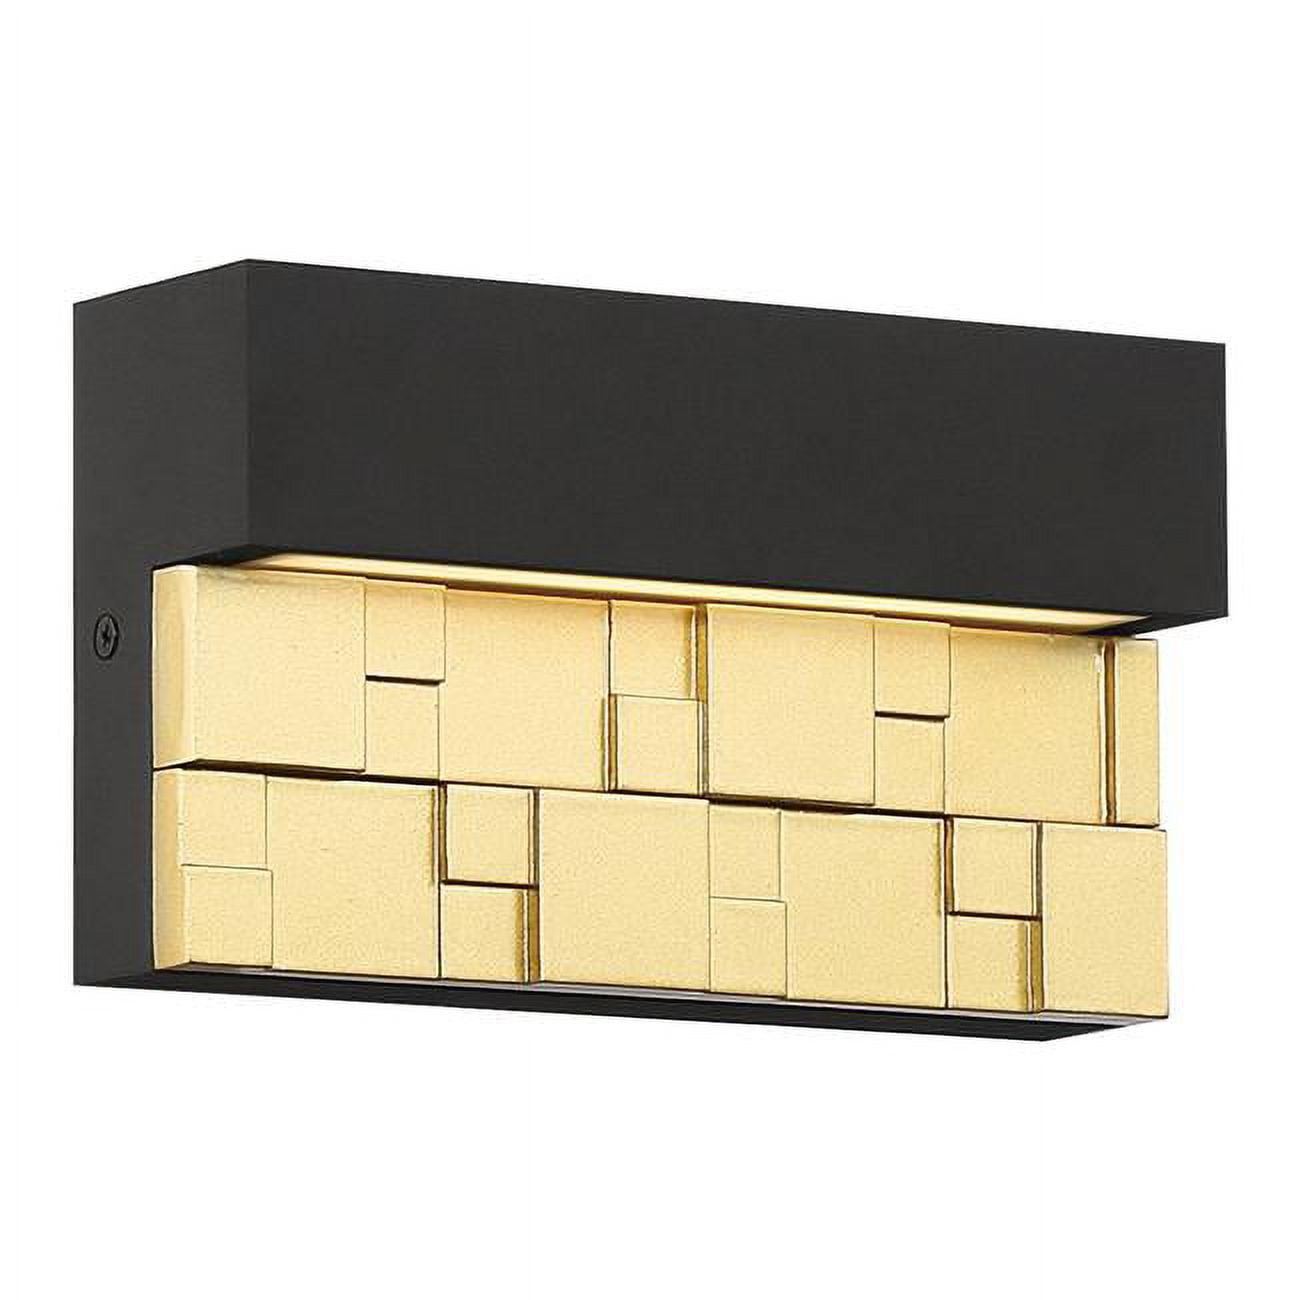 20049leddmg-brz-gld 8 In. Grid Led Ada Wall Sconce Light, Bronze With Gold